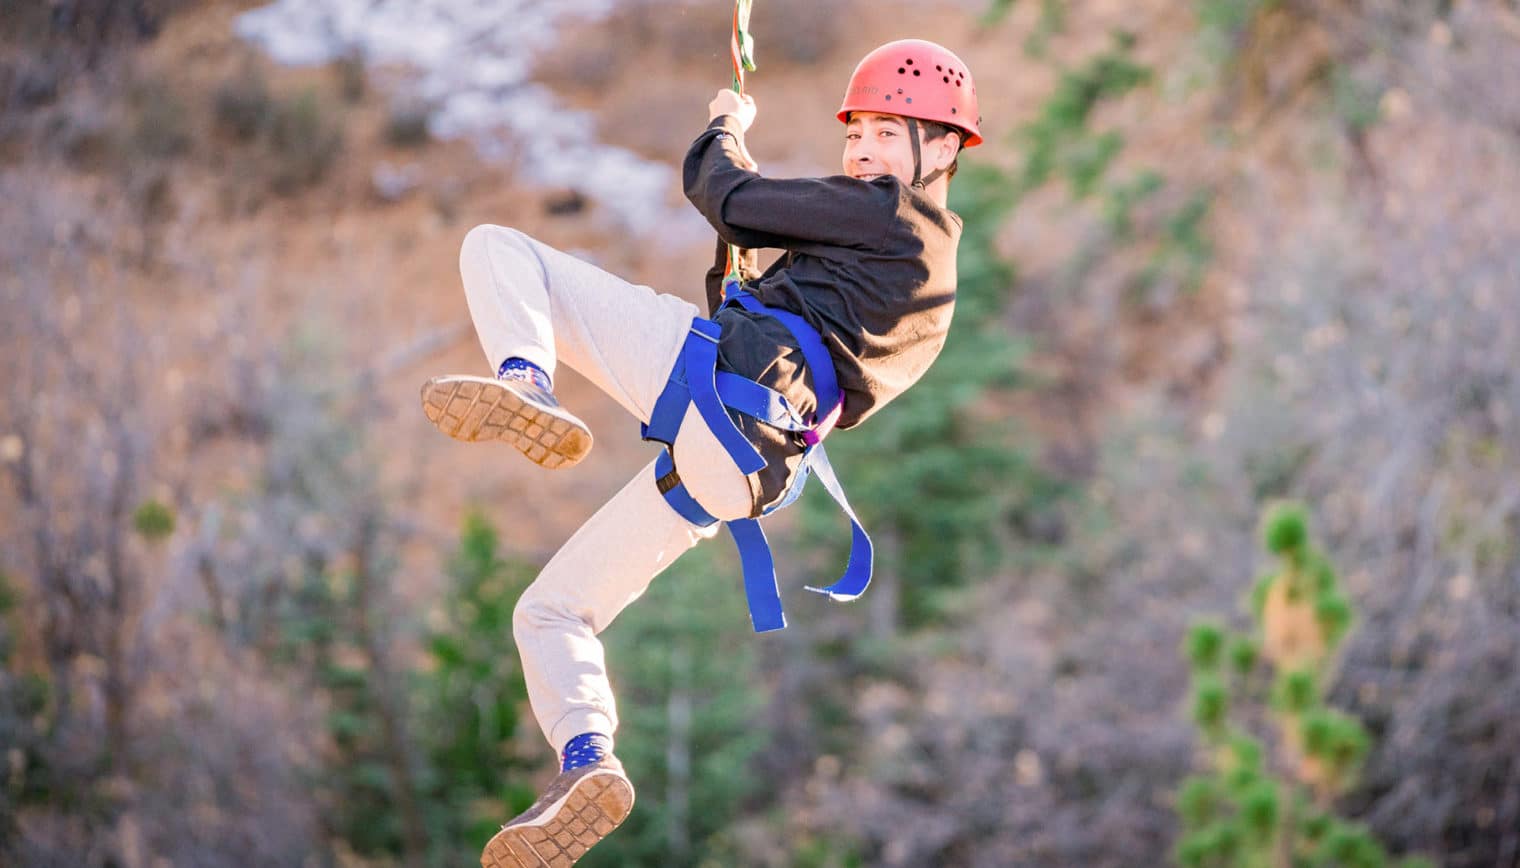 A person looking back and smiling as they ride a zip line.